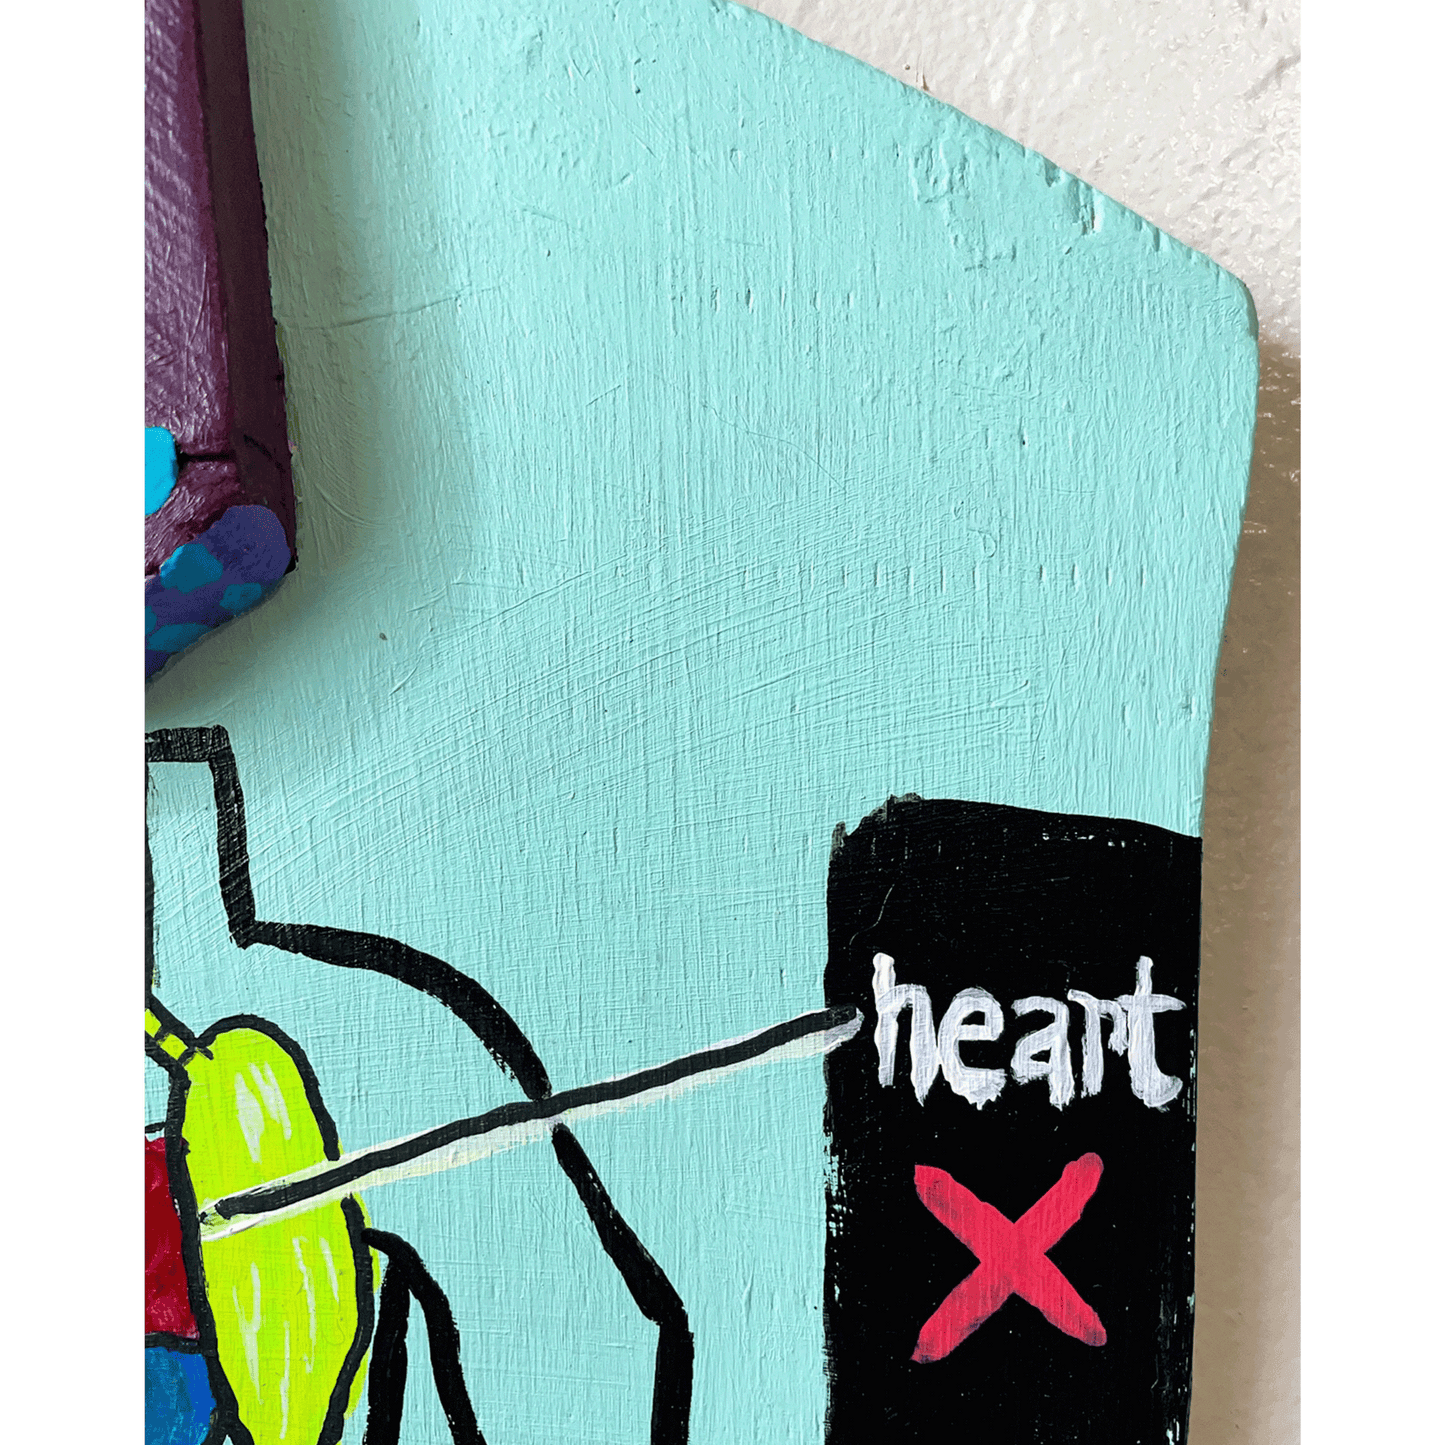 "Untitled (Heart)" - Assemblage